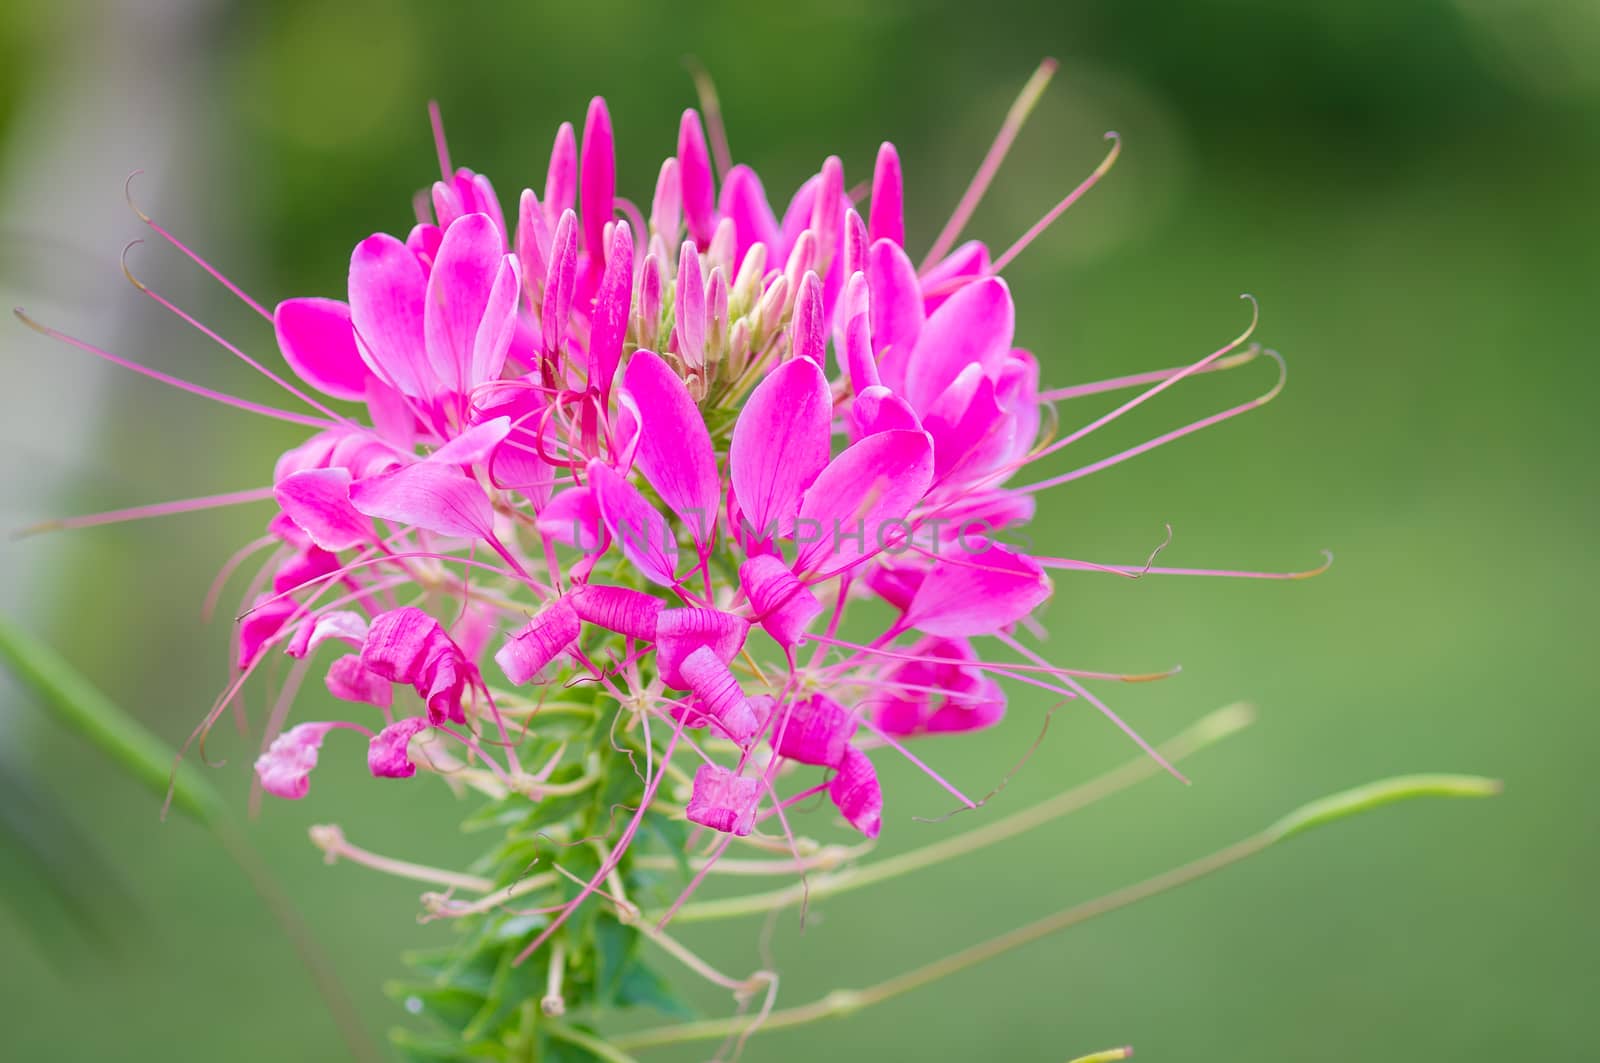 Spider flower(Cleome hassleriana) in the garden for background use.